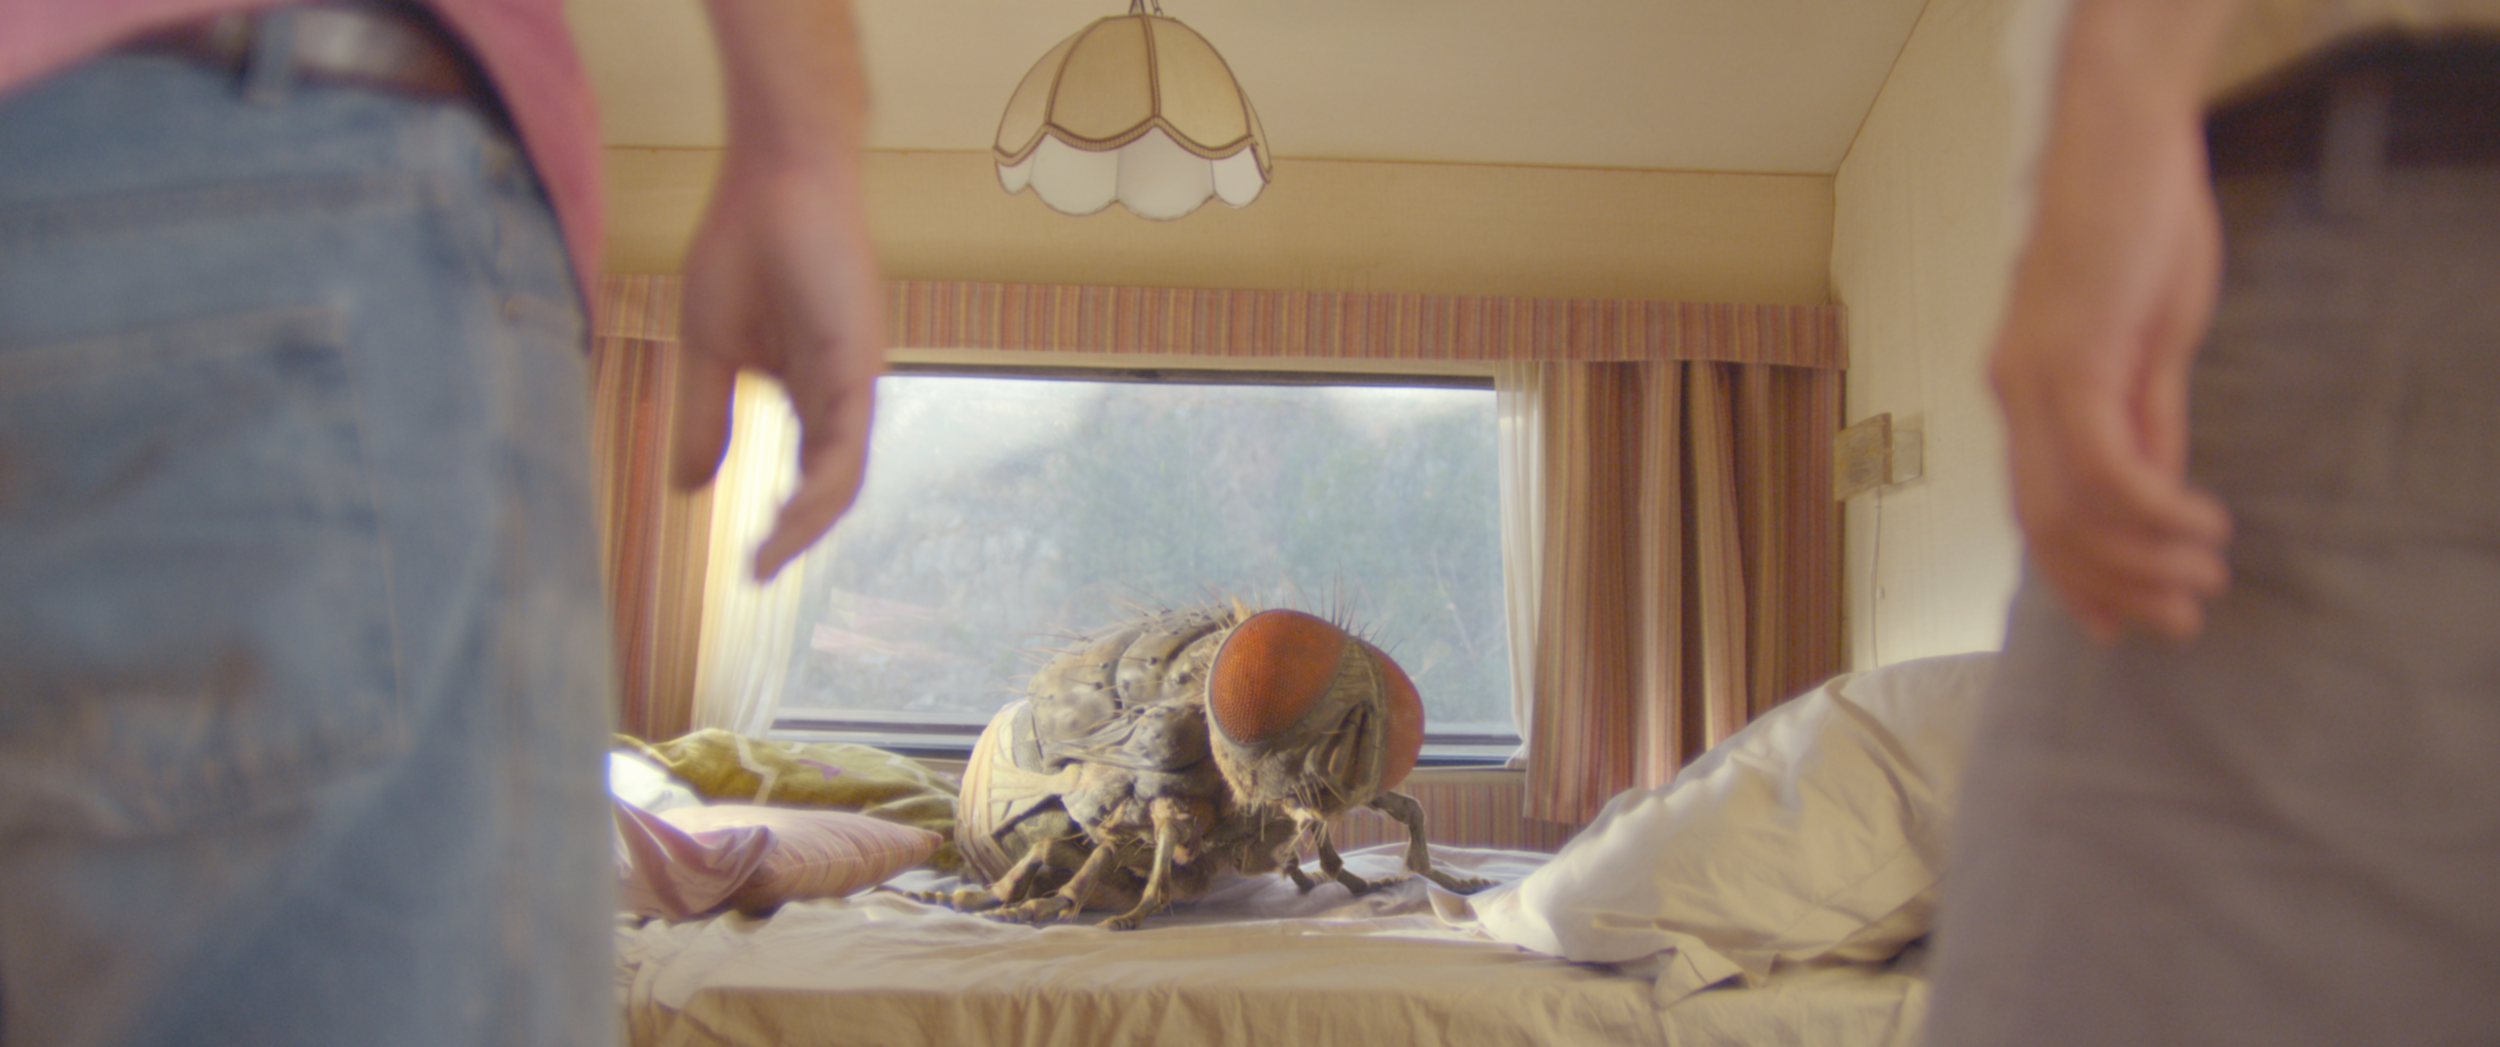 Mandibles' fly on the bed